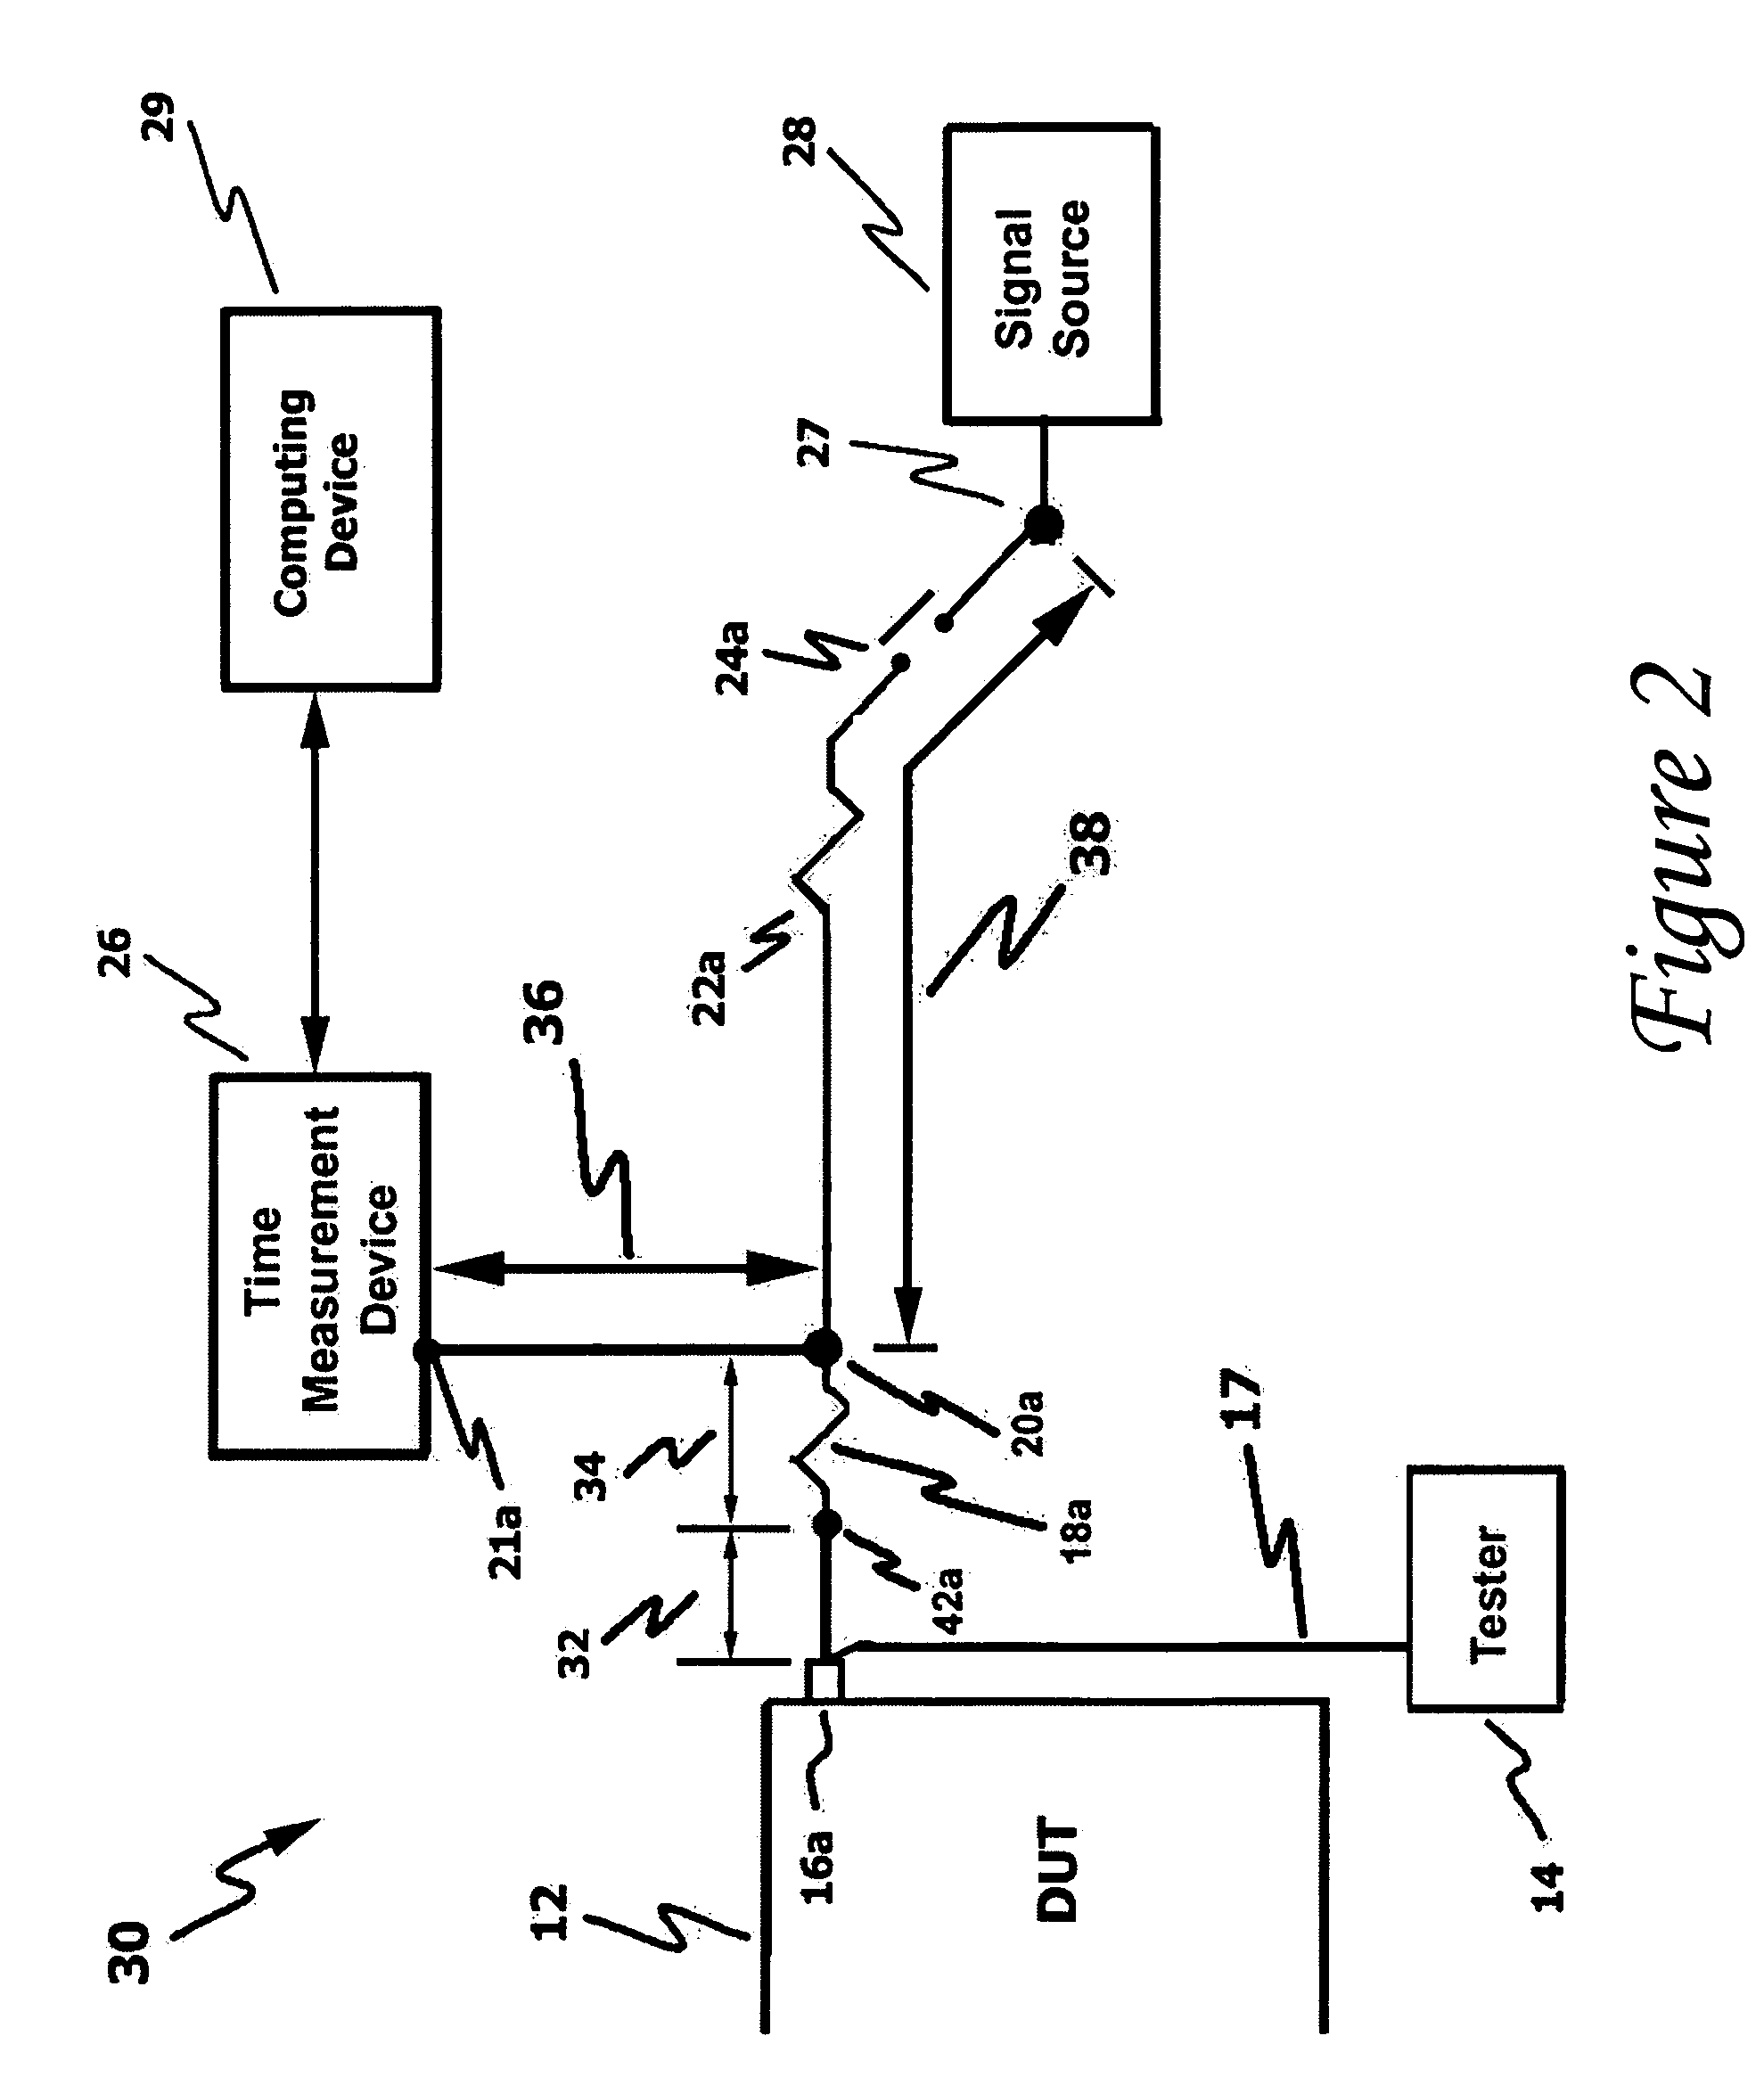 System and method for calibrating signal paths connecting a device under test to a test system